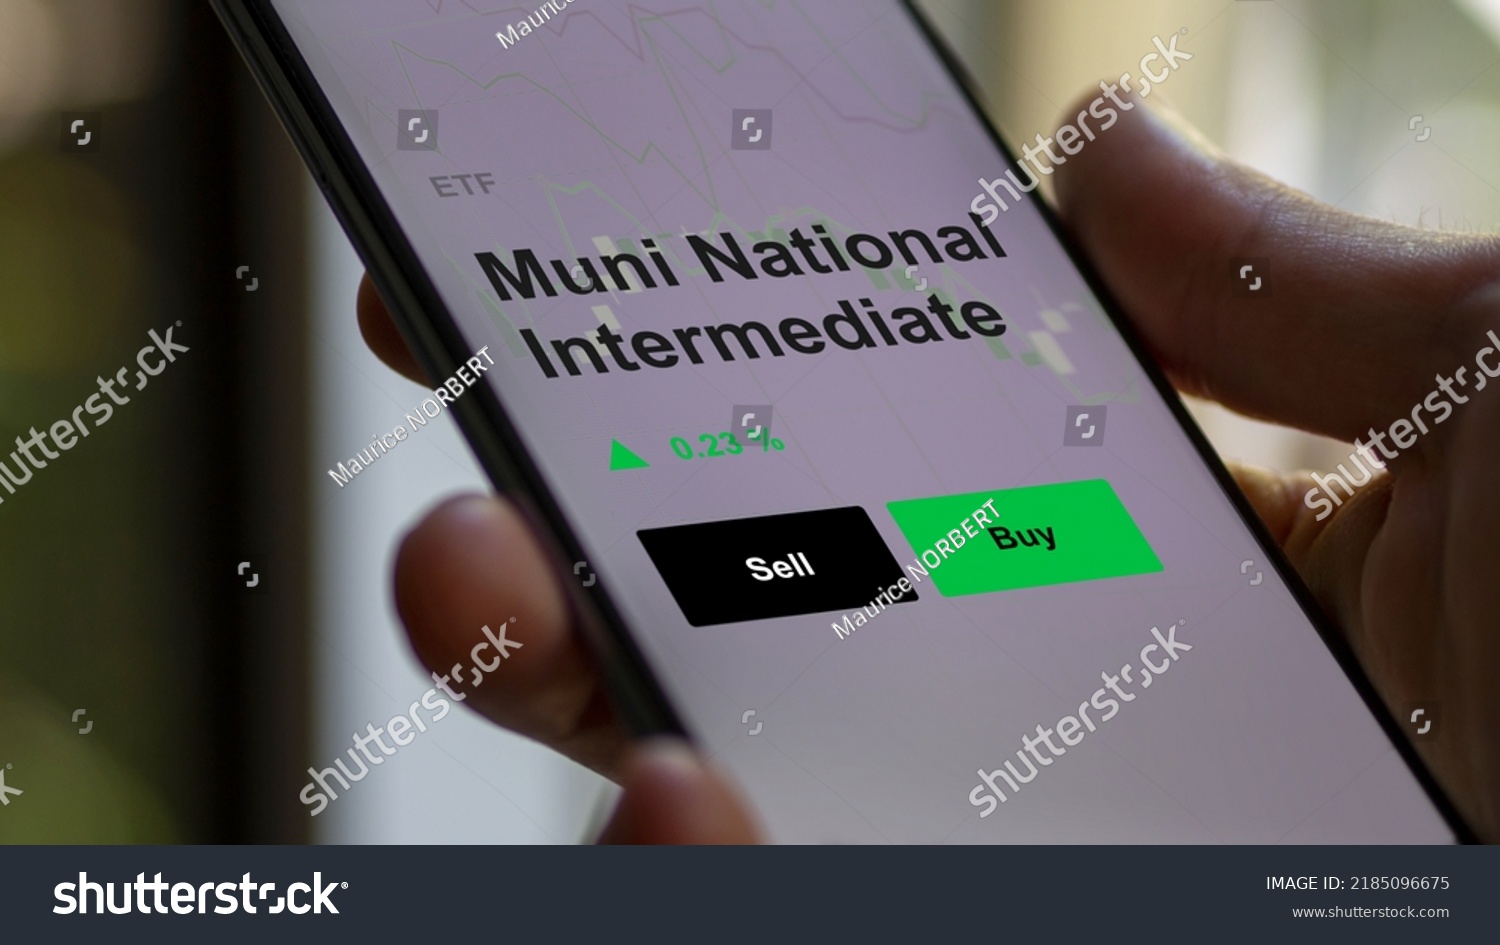 An investor's analyzing the muni national intermediate etf fund on a screen. A phone shows the prices of Muni National Intermediate #2185096675